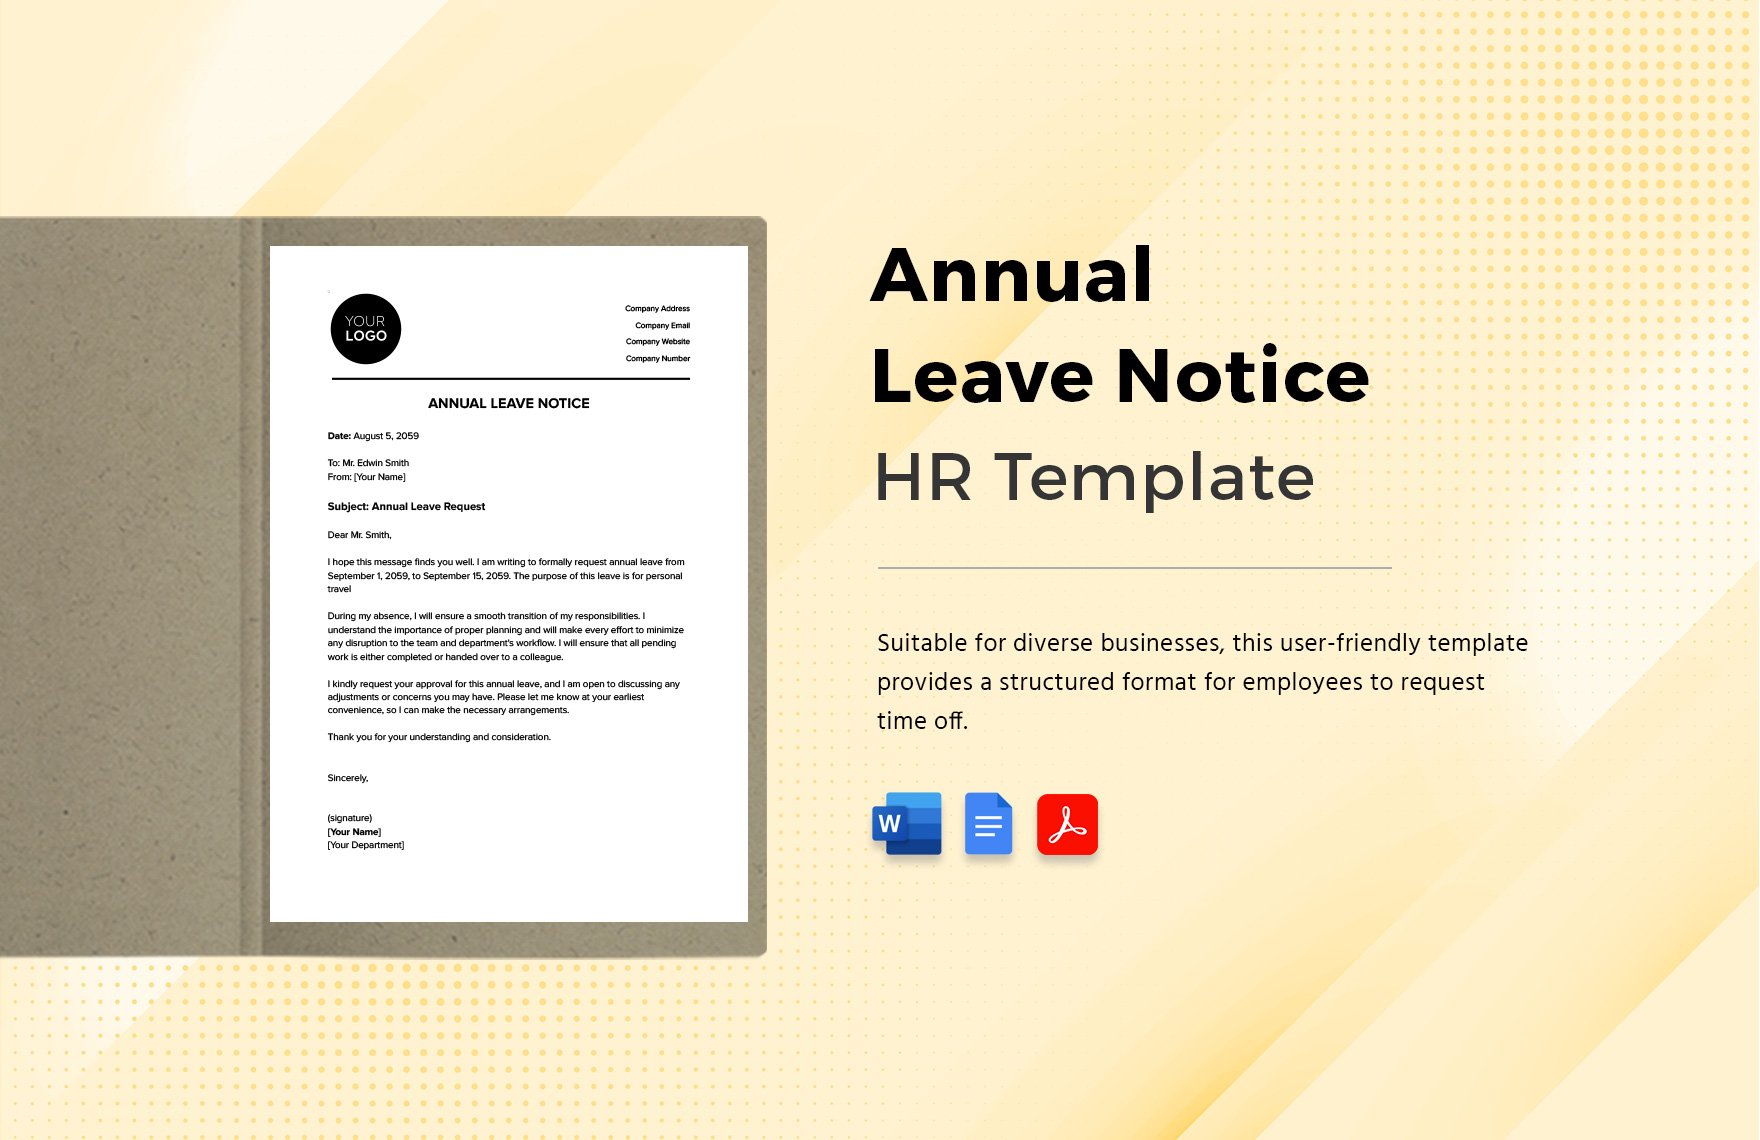 Annual Leave Notice HR Template